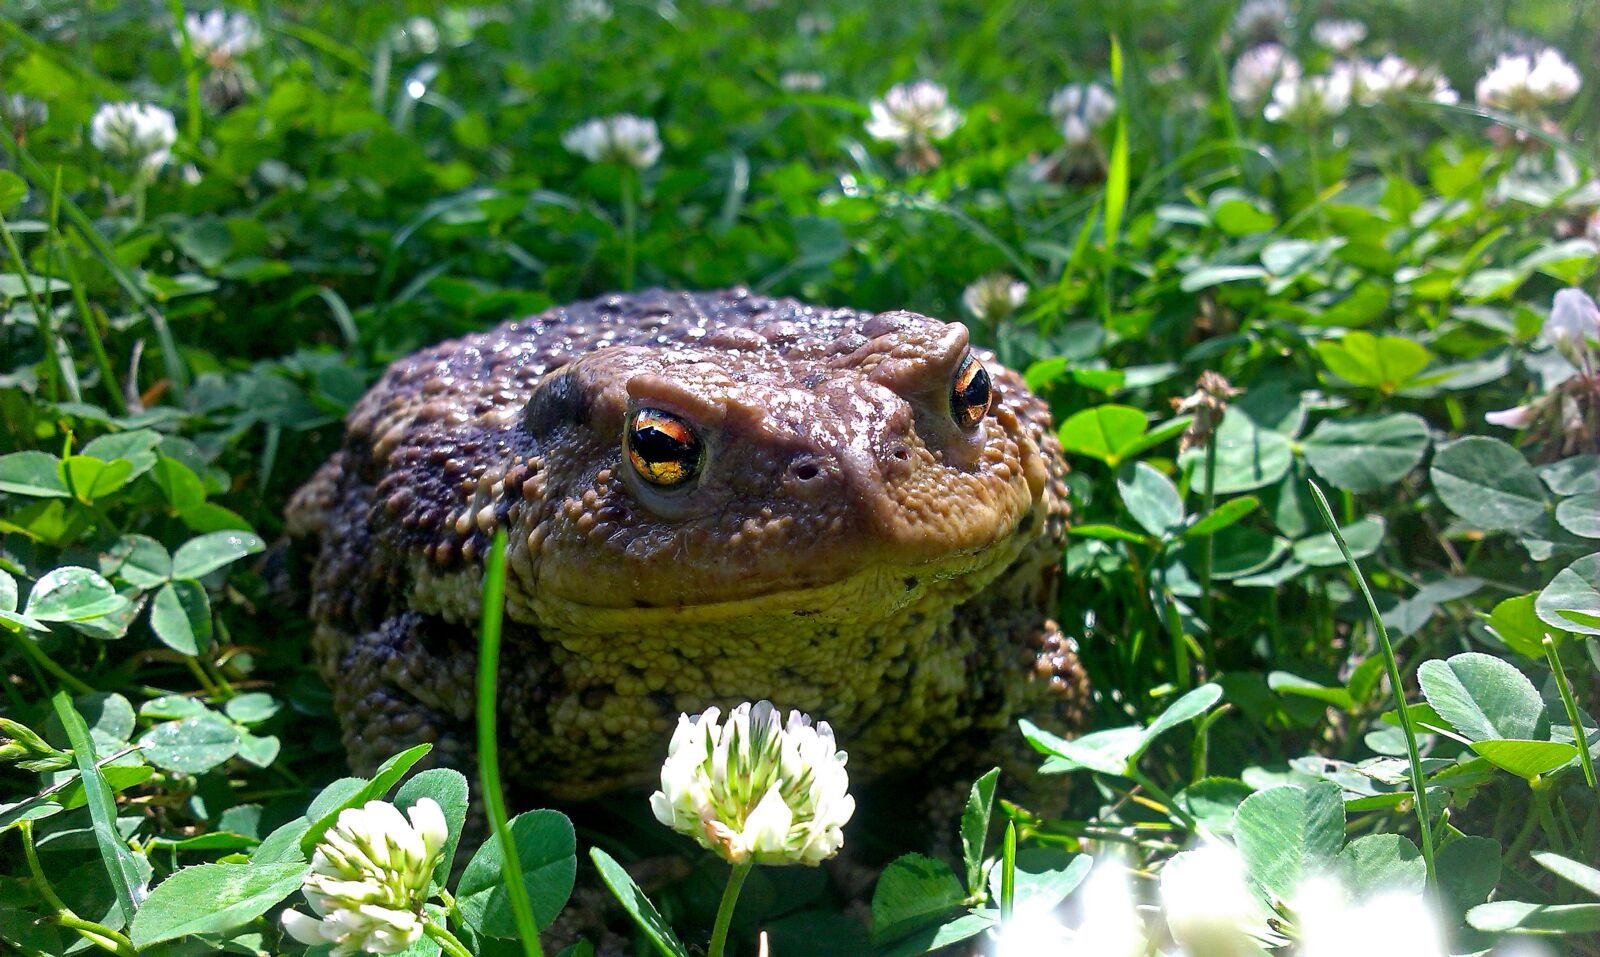 HTC DESIRE 500 sample photo. Toad, nature, garden photography